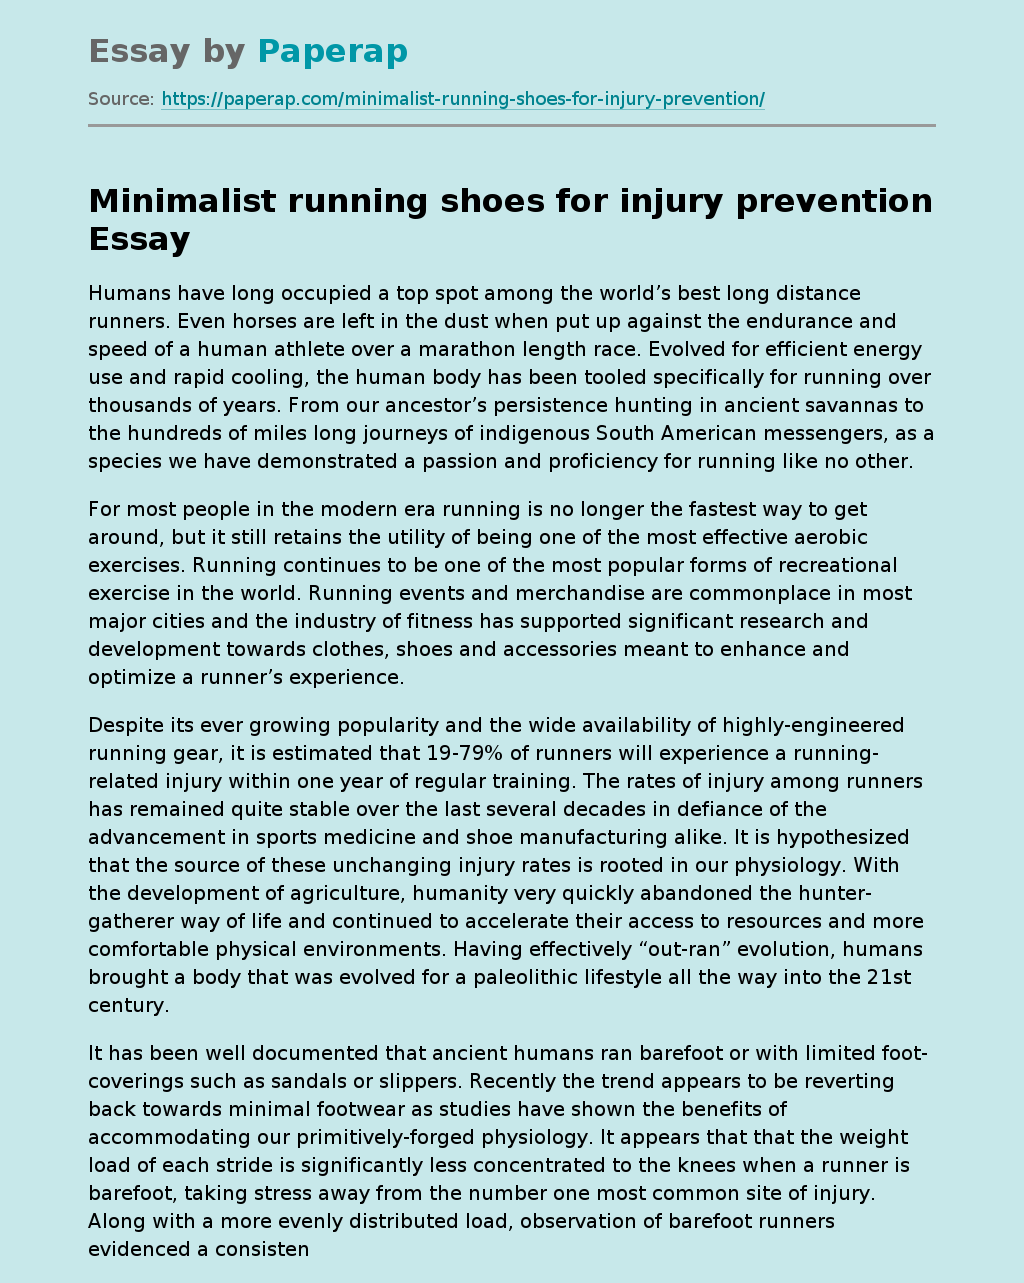 Minimalist running shoes for injury prevention